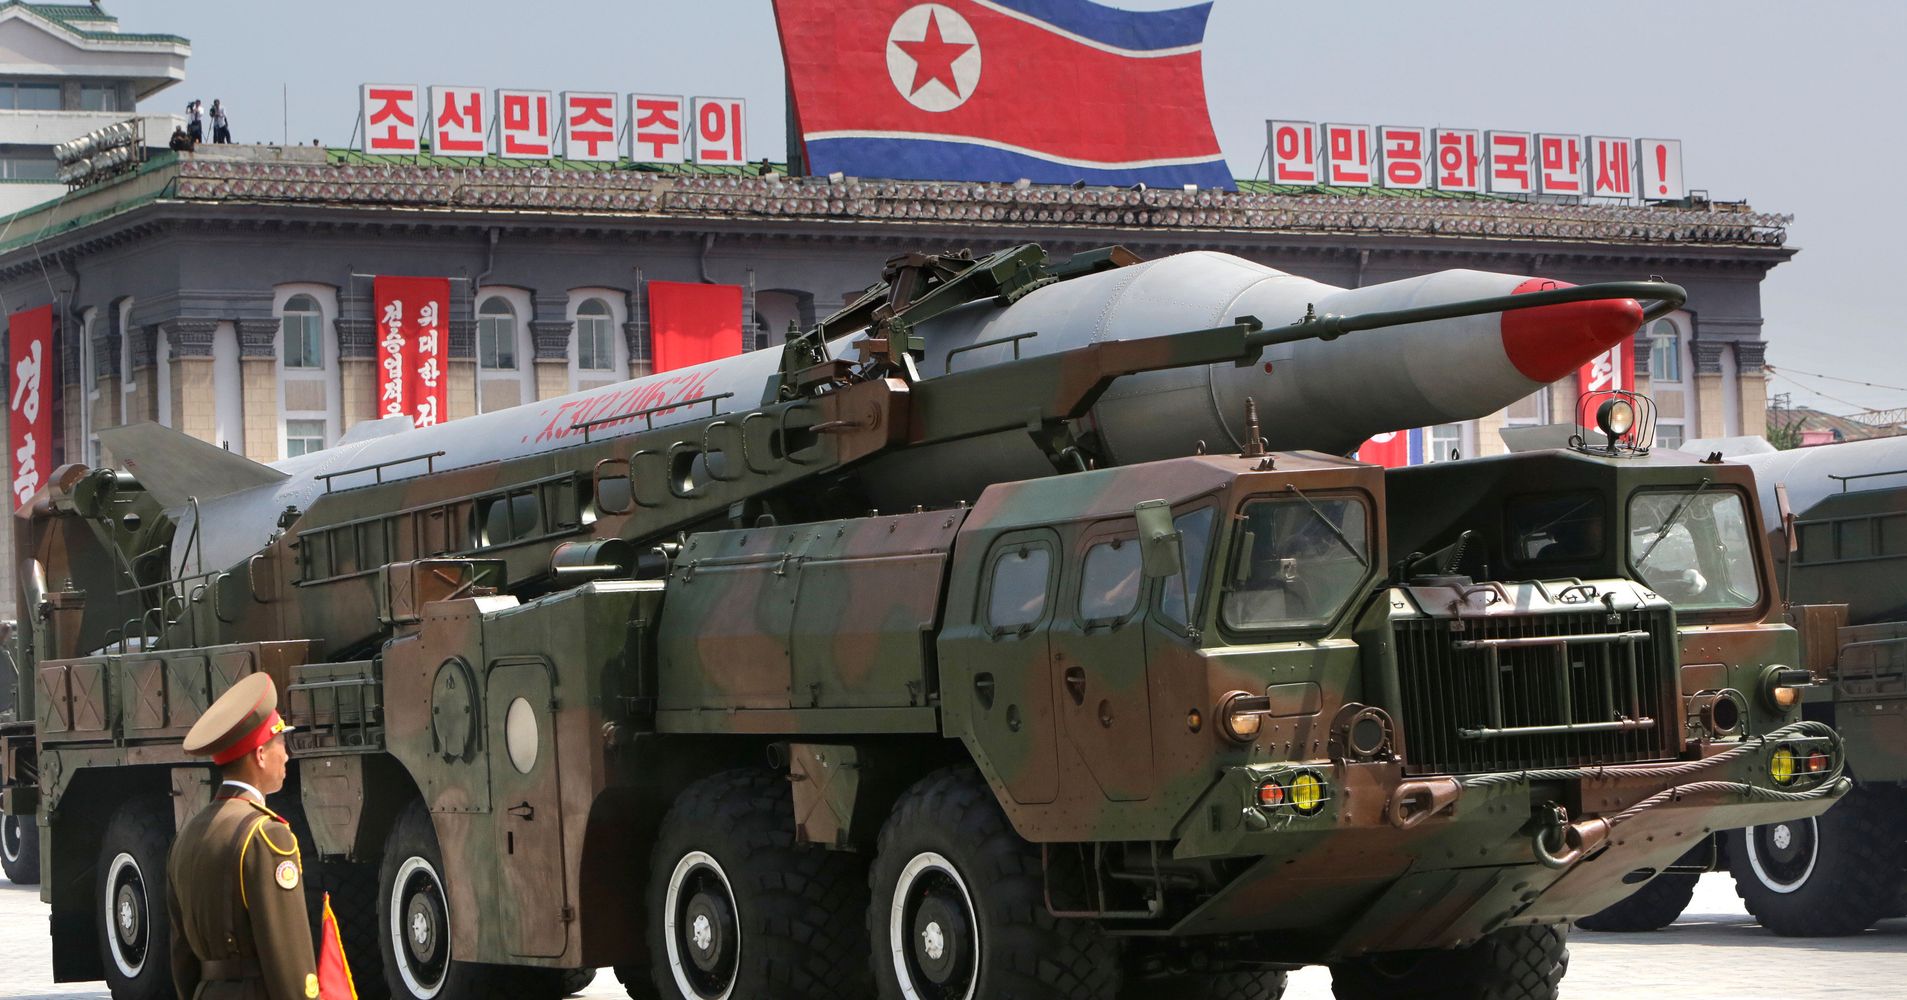 What You Need To Know About North Korea's Nuclear Program | HuffPost